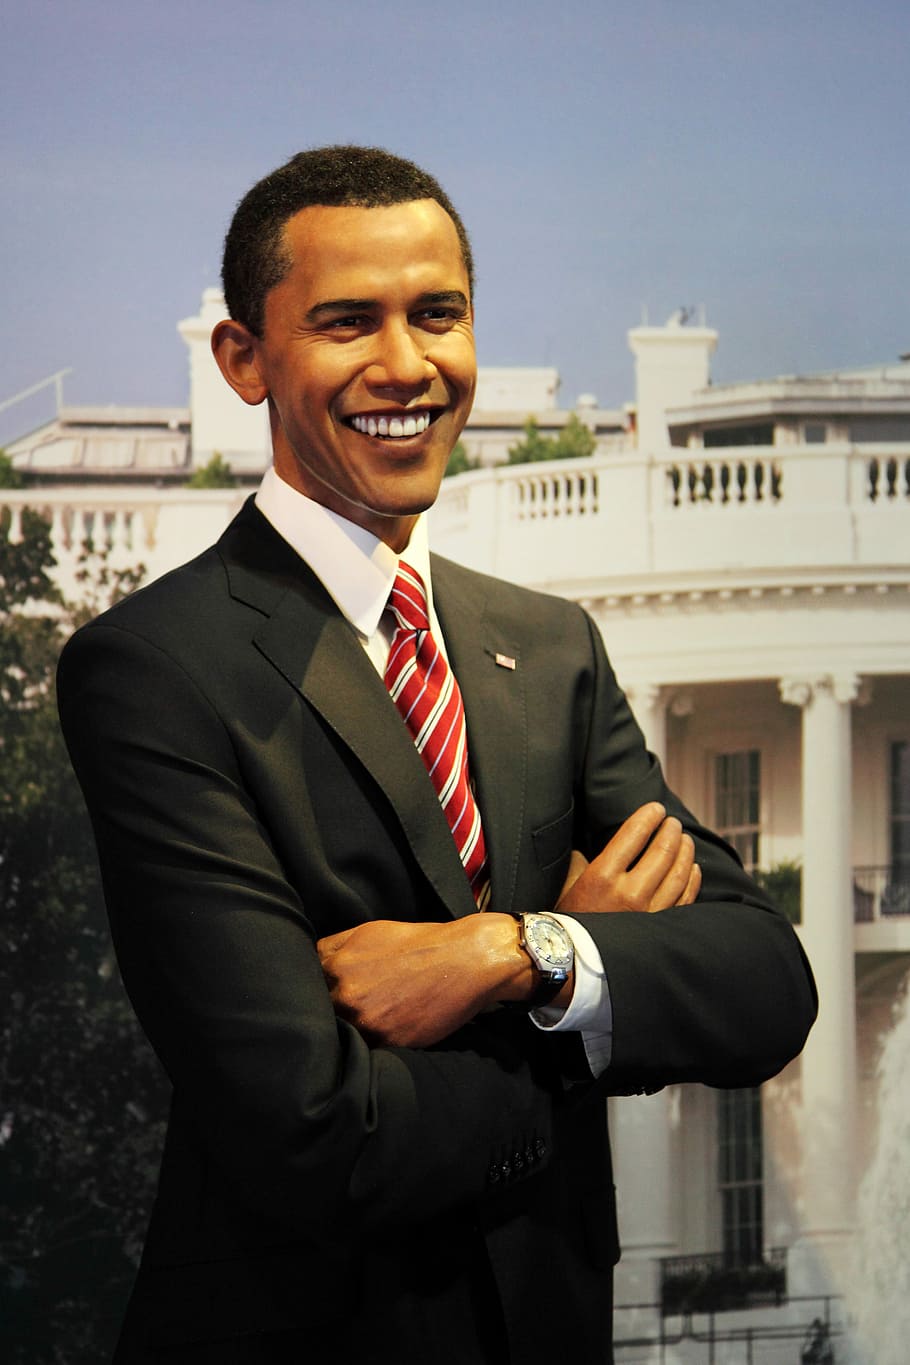 Man in Suit with Barack Obama Face, photos, politician, president